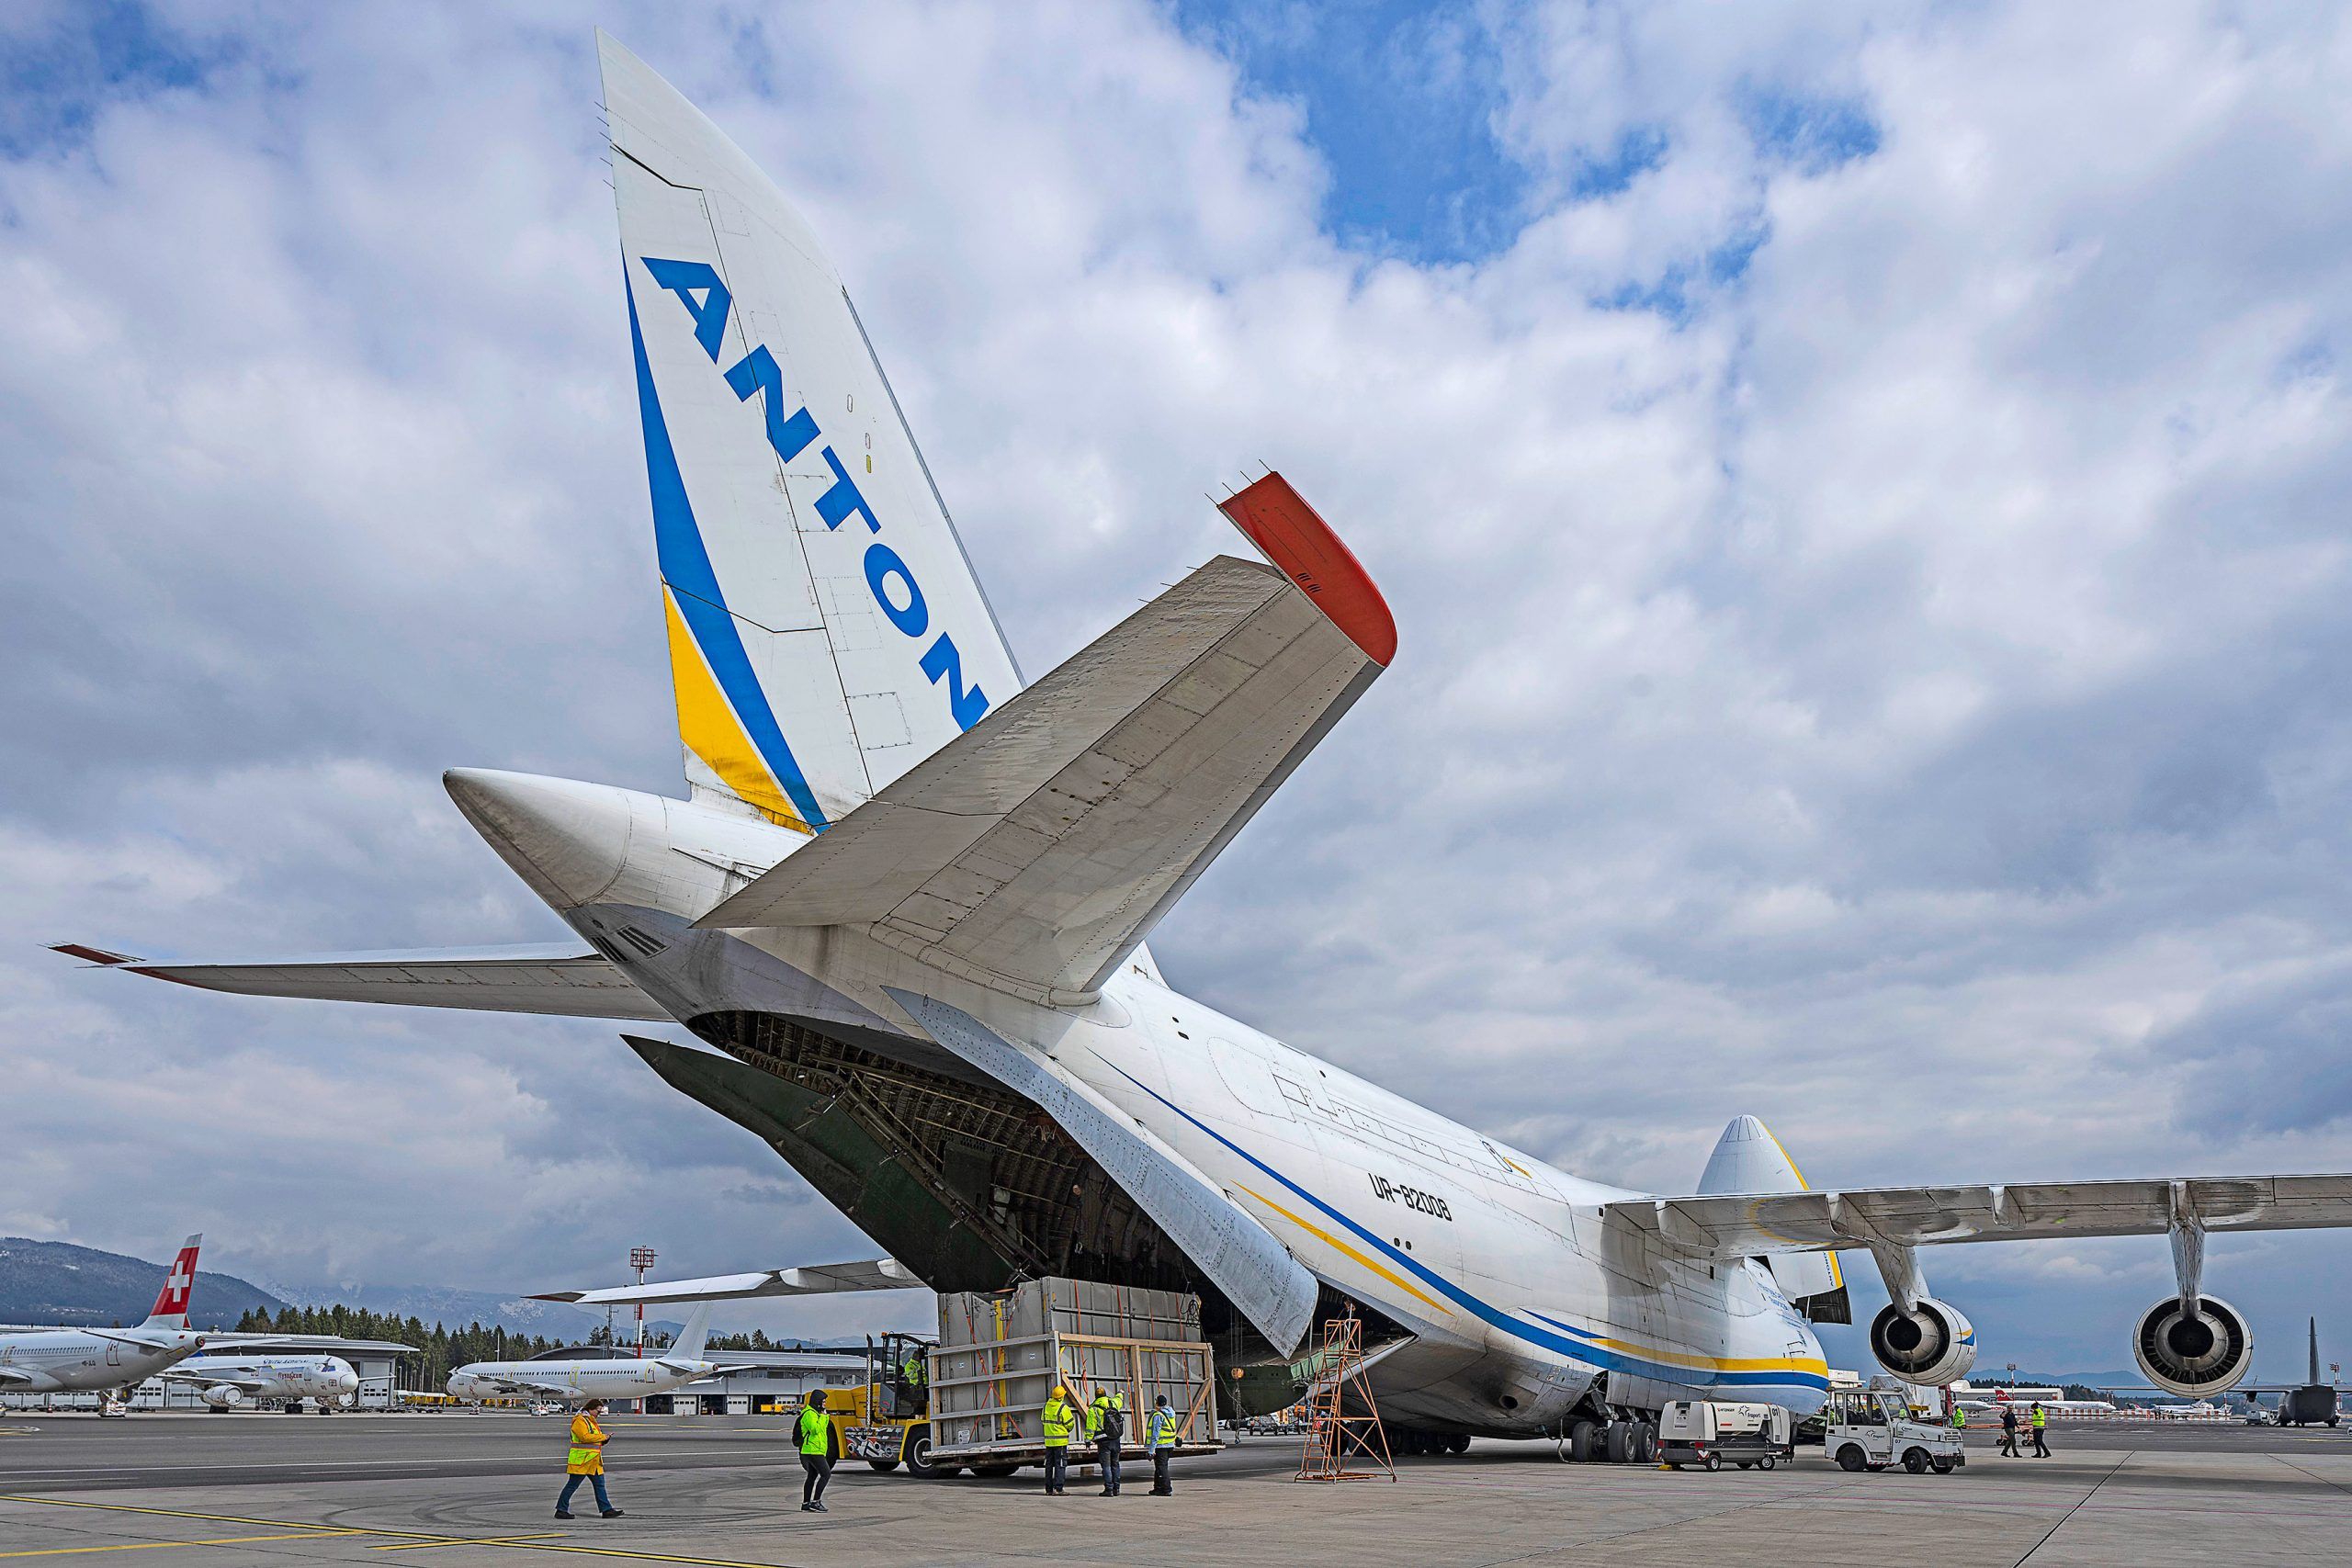 Tail of Antonov 124 as it is being loaded with cargo